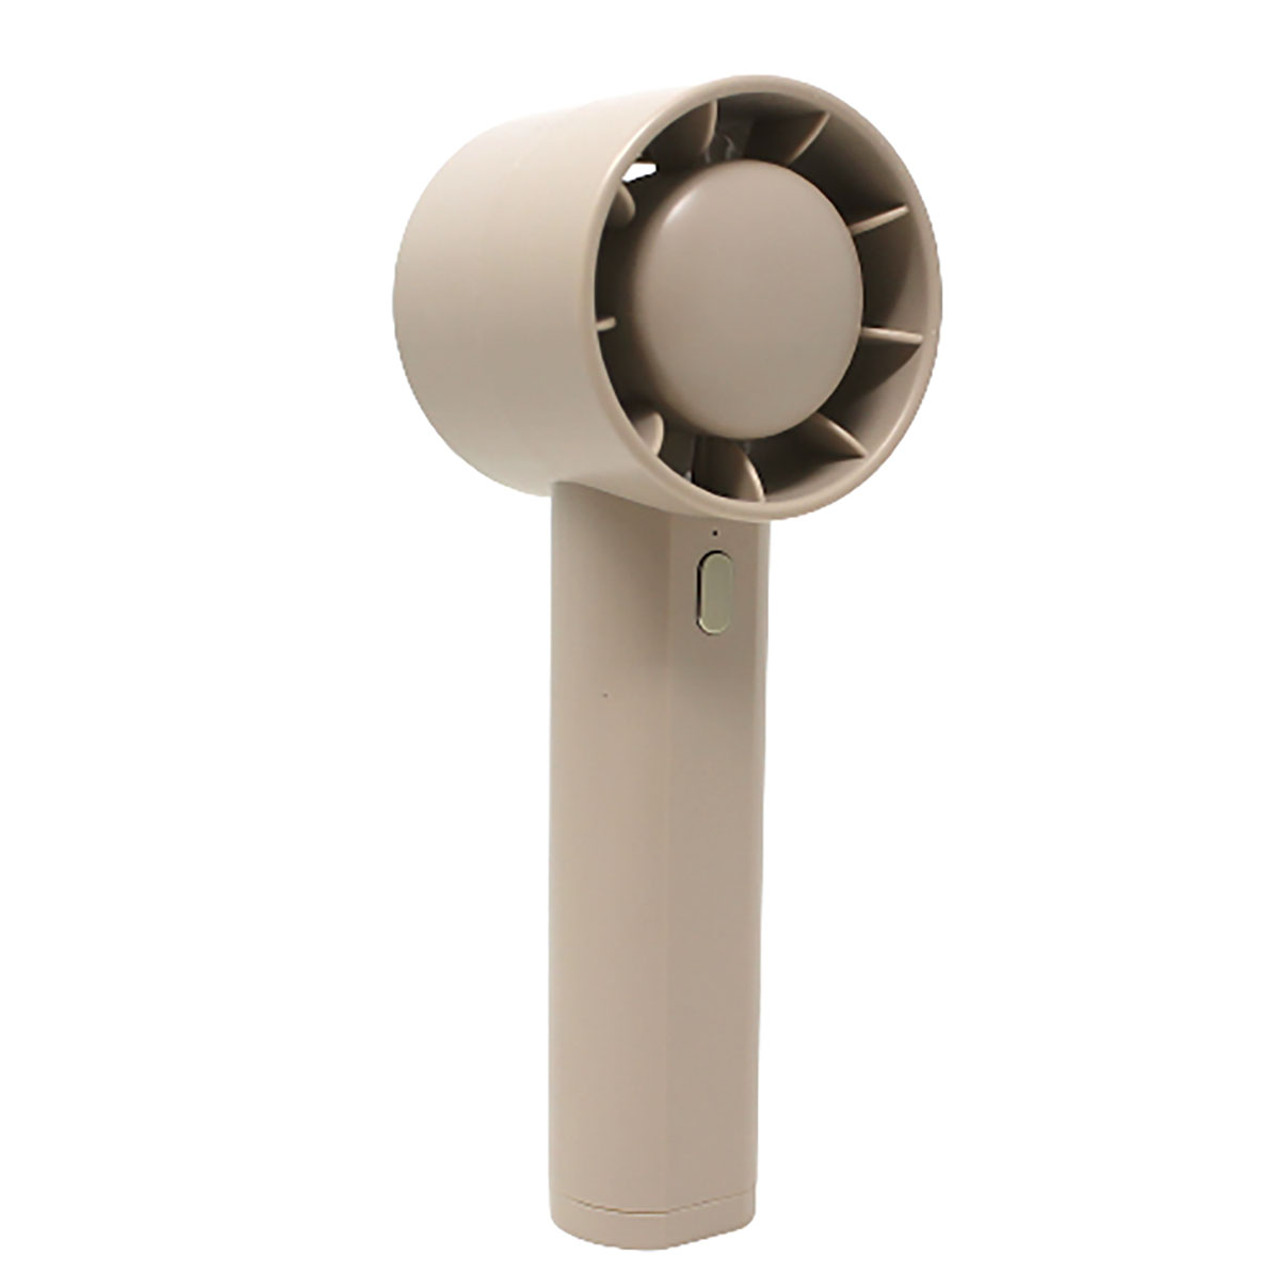 Mini Rechargeable Portable Handheld Fan product image